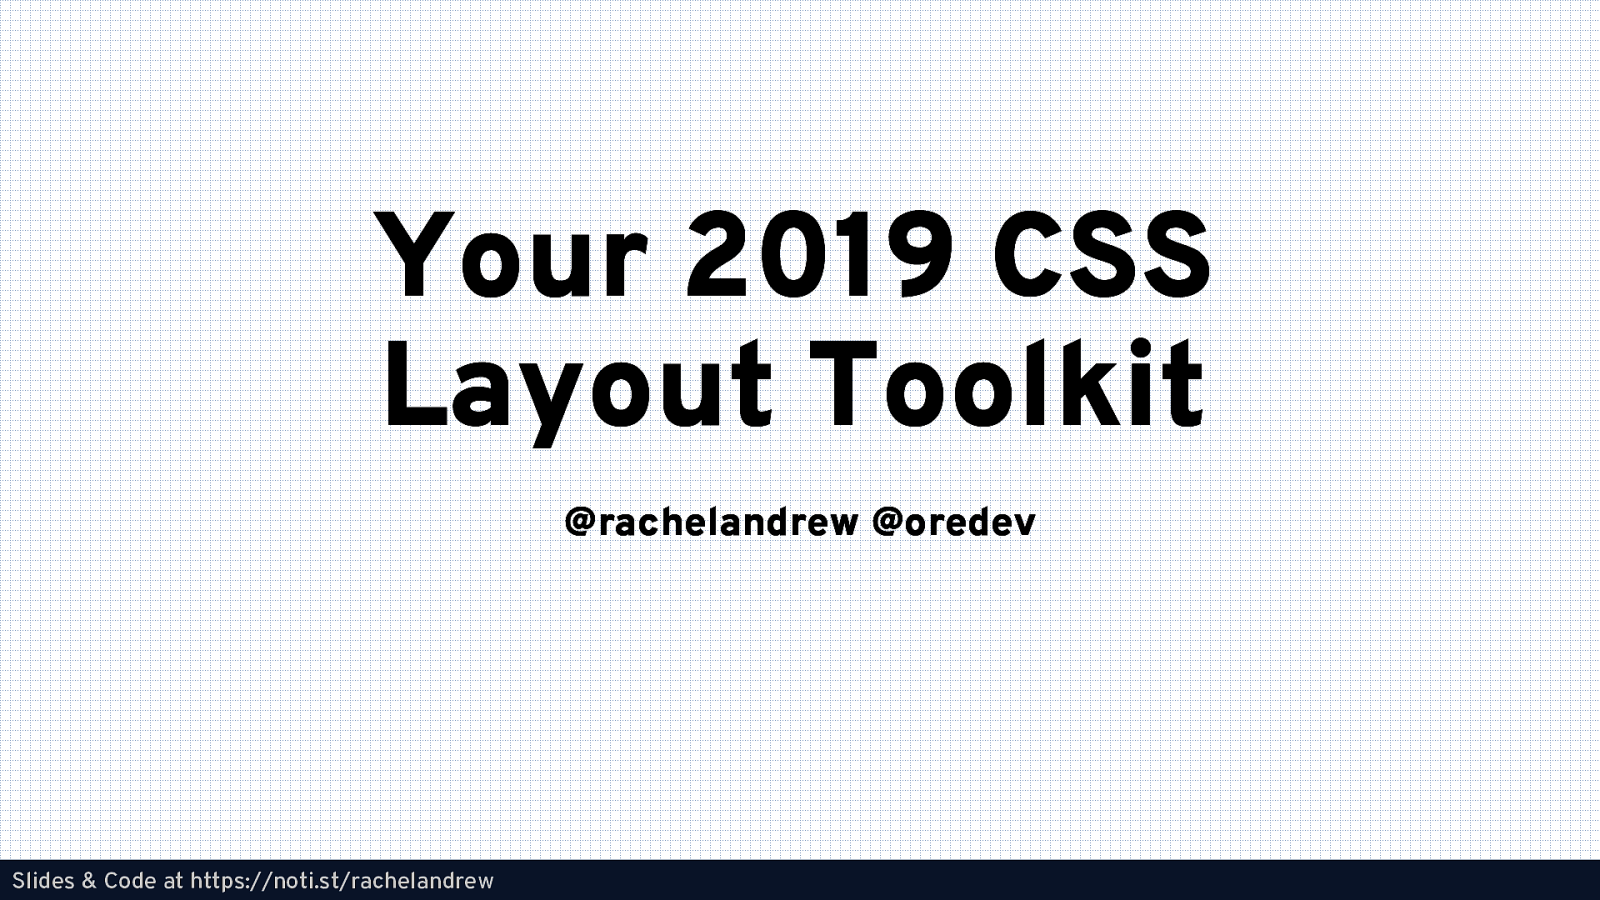 Your CSS Layout Toolkit for 2019